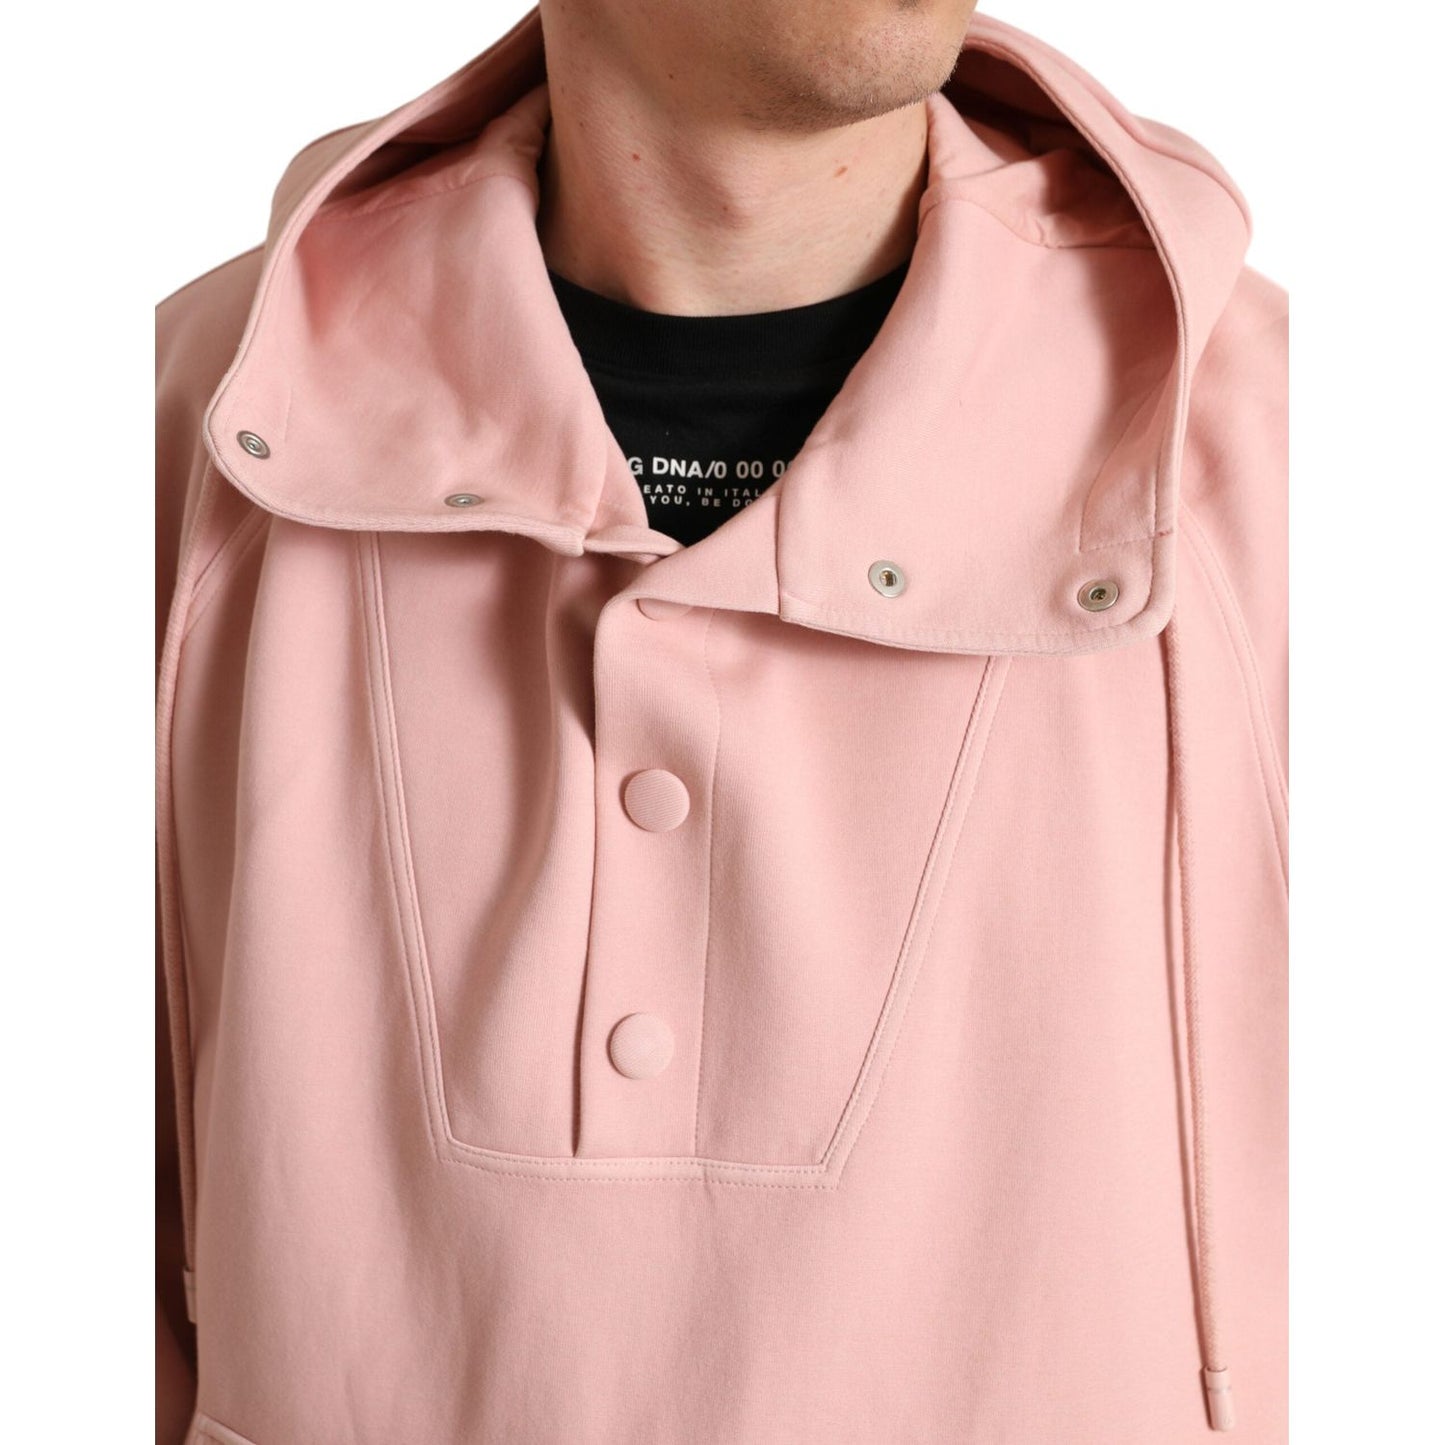 Dolce & Gabbana Elegant Pink Pullover Sweater with Hood pink-cotton-hooded-pockets-pullover-sweater